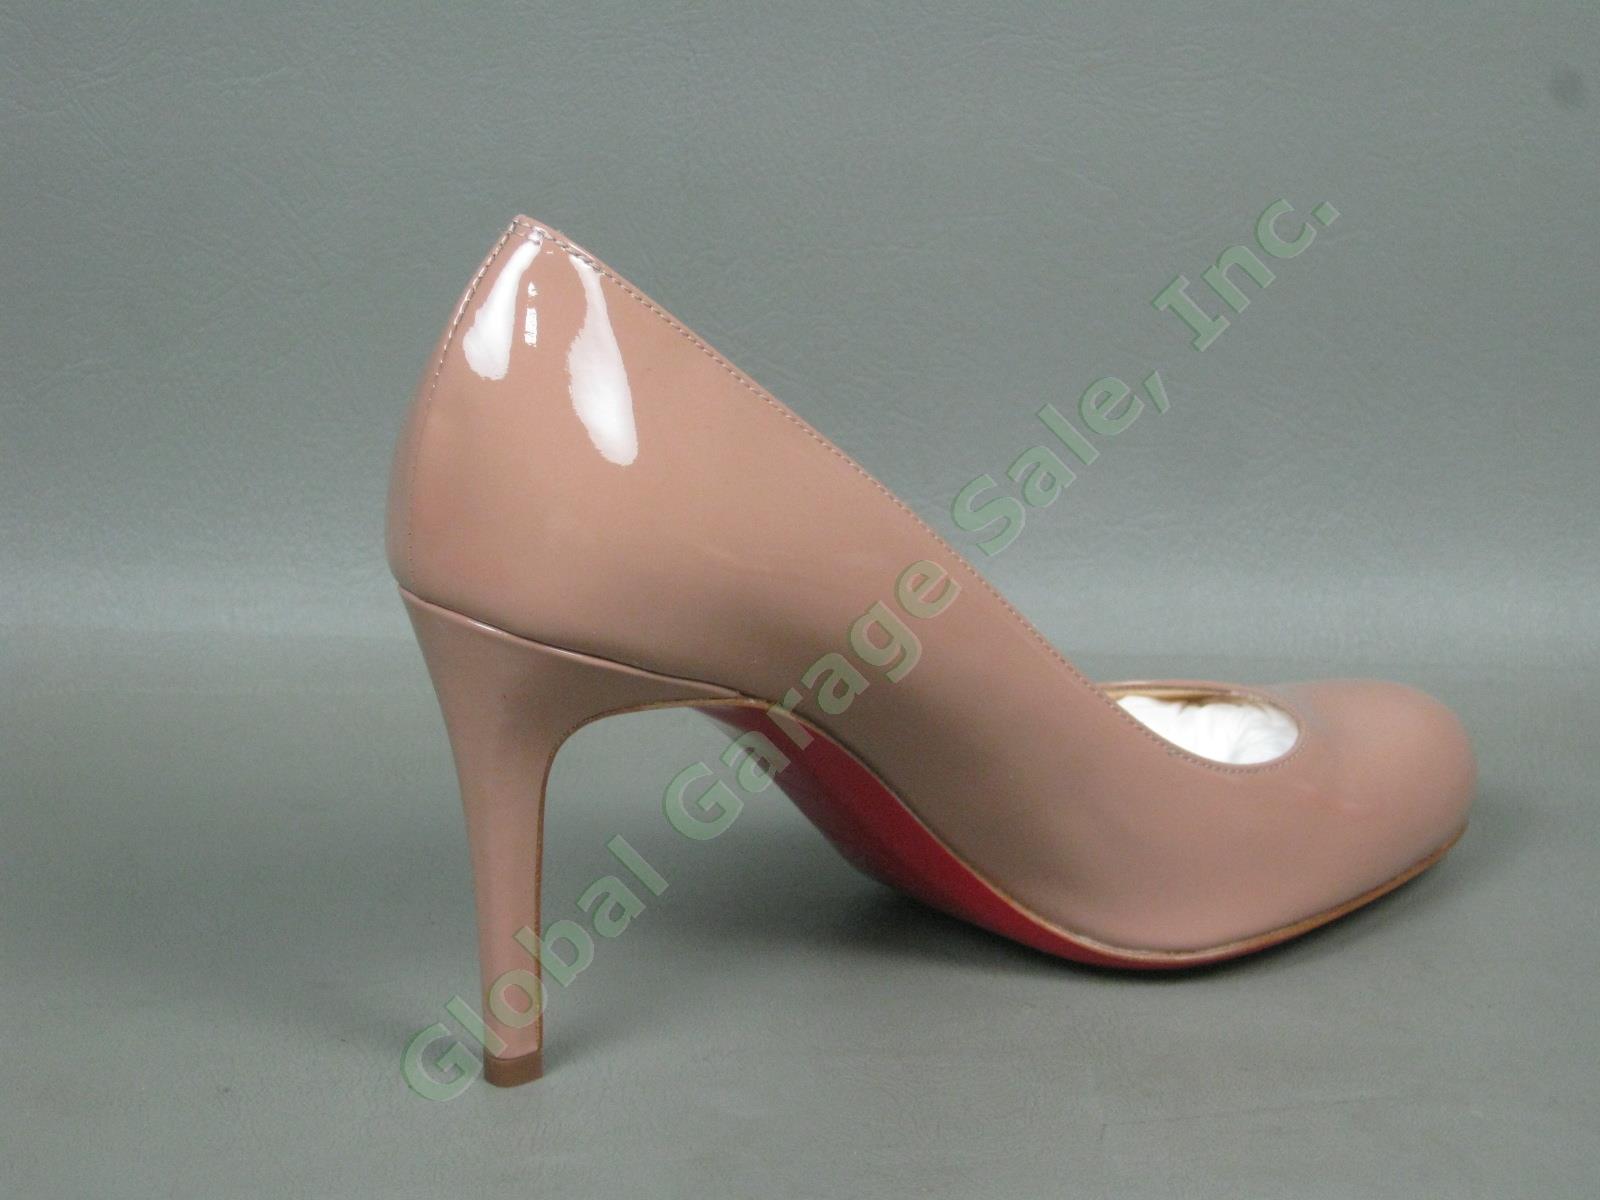 NEW Christian Louboutin Nude Simple Patent Calf Leather Pump 90mm Heel 37.5/7.5 2